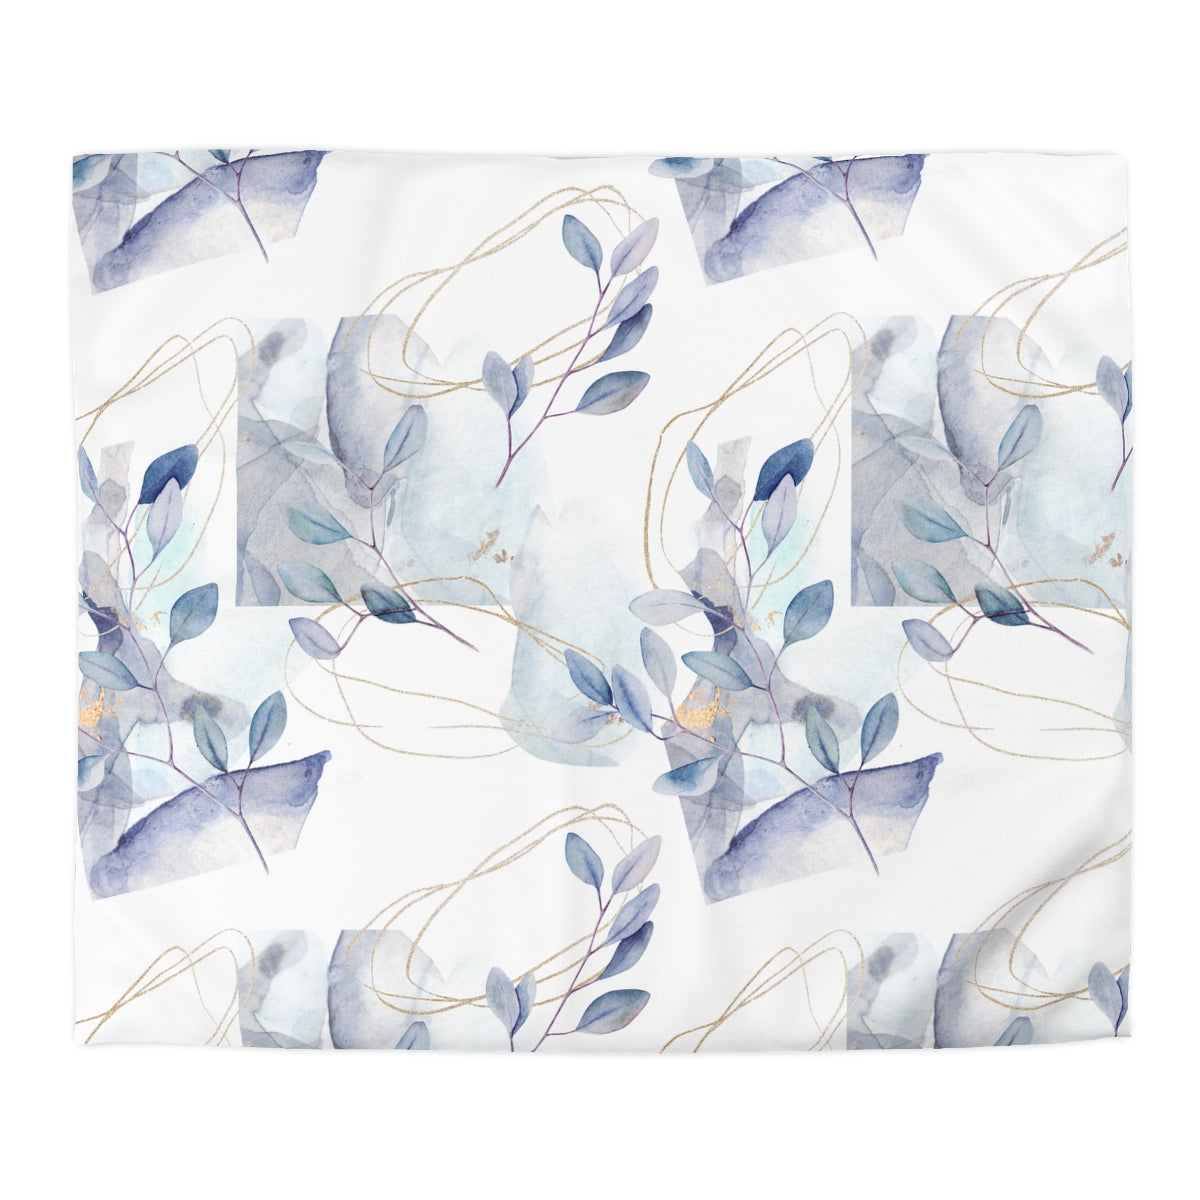 Abstract Floral Branches Microfiber Duvet Cover